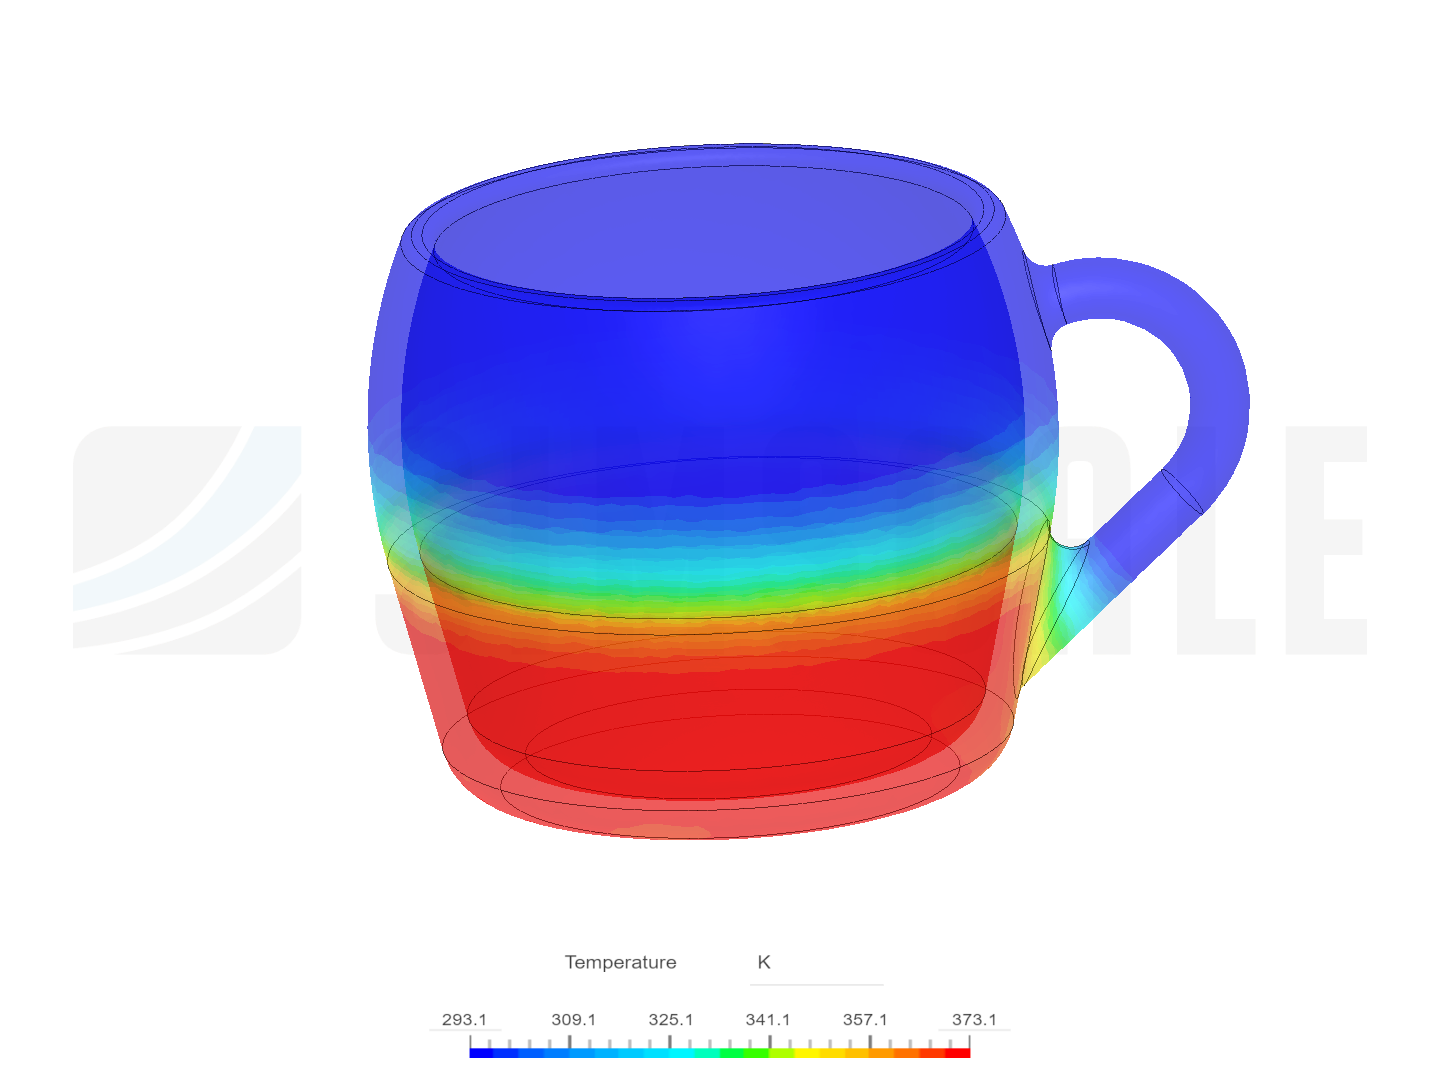 cup of tea or coffe image